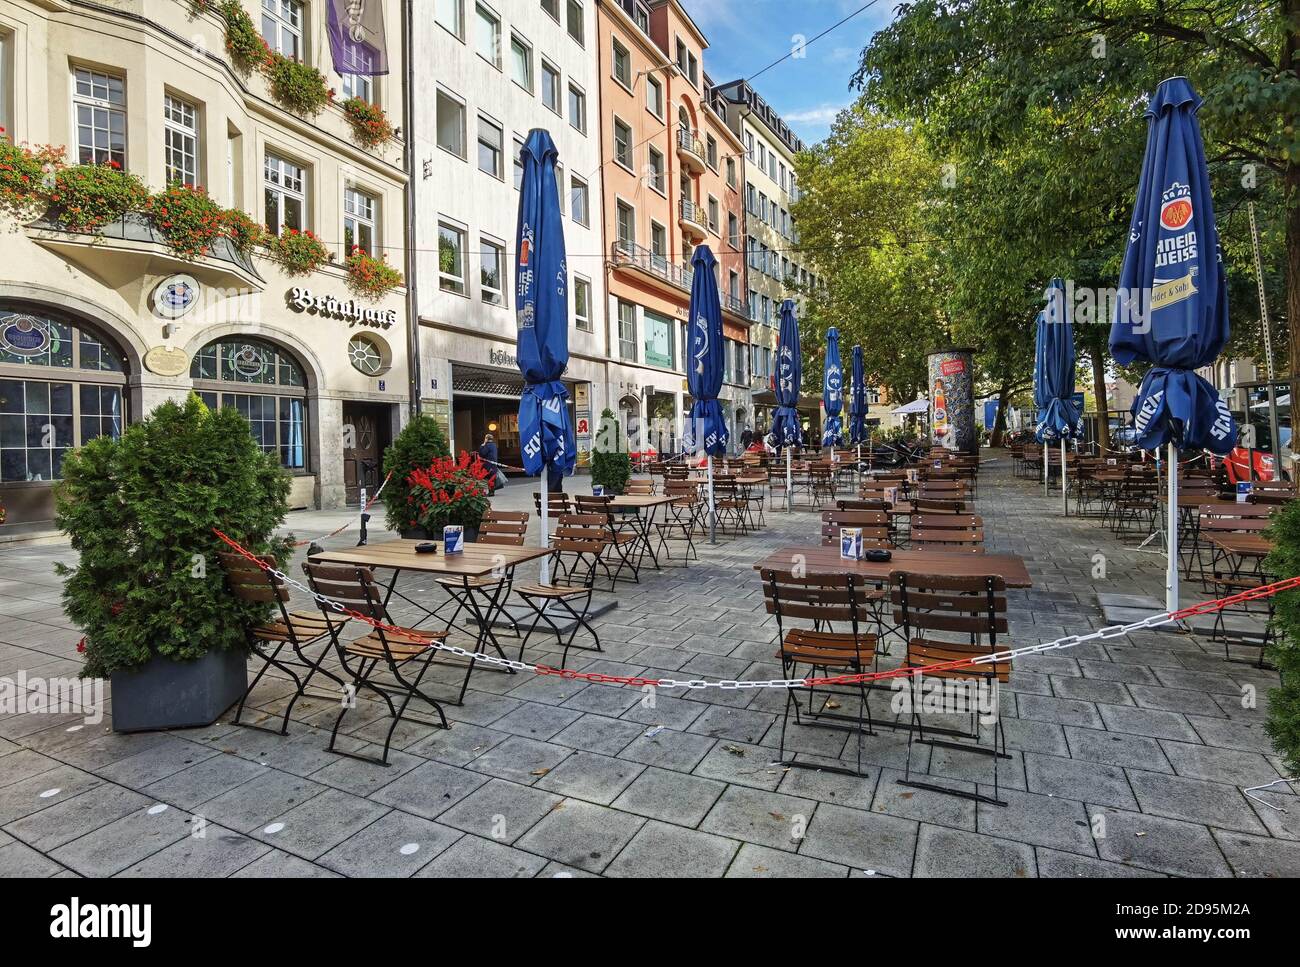 Munich, Bavaria, Germany. 3rd Nov, 2020. Outdoor seating at a traditional restaurant in the Tal district of Munich, Germany. Due to the Coronavirus crisis, visits to restaurants were already low and the second restriction phase has shut them down. Critics state that restaurants with proper preventative protocols in place are being punished for those in society not following any measures at all. Credit: Sachelle Babbar/ZUMA Wire/Alamy Live News Stock Photo